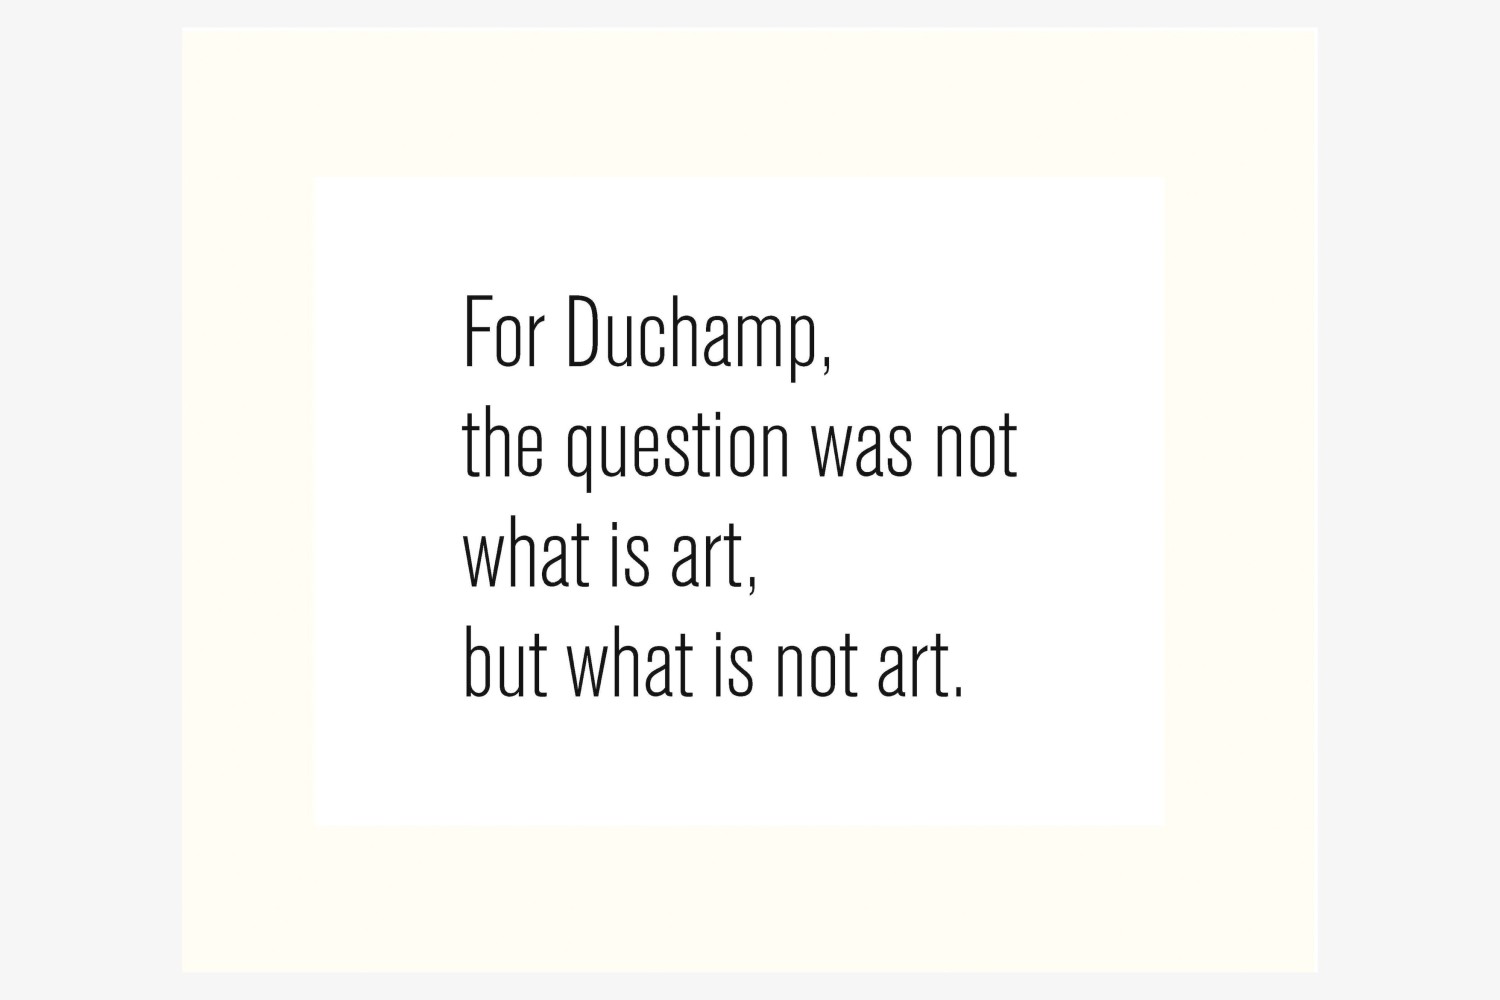 View of «For Duchamp, the question was not what art is, but what is not art»